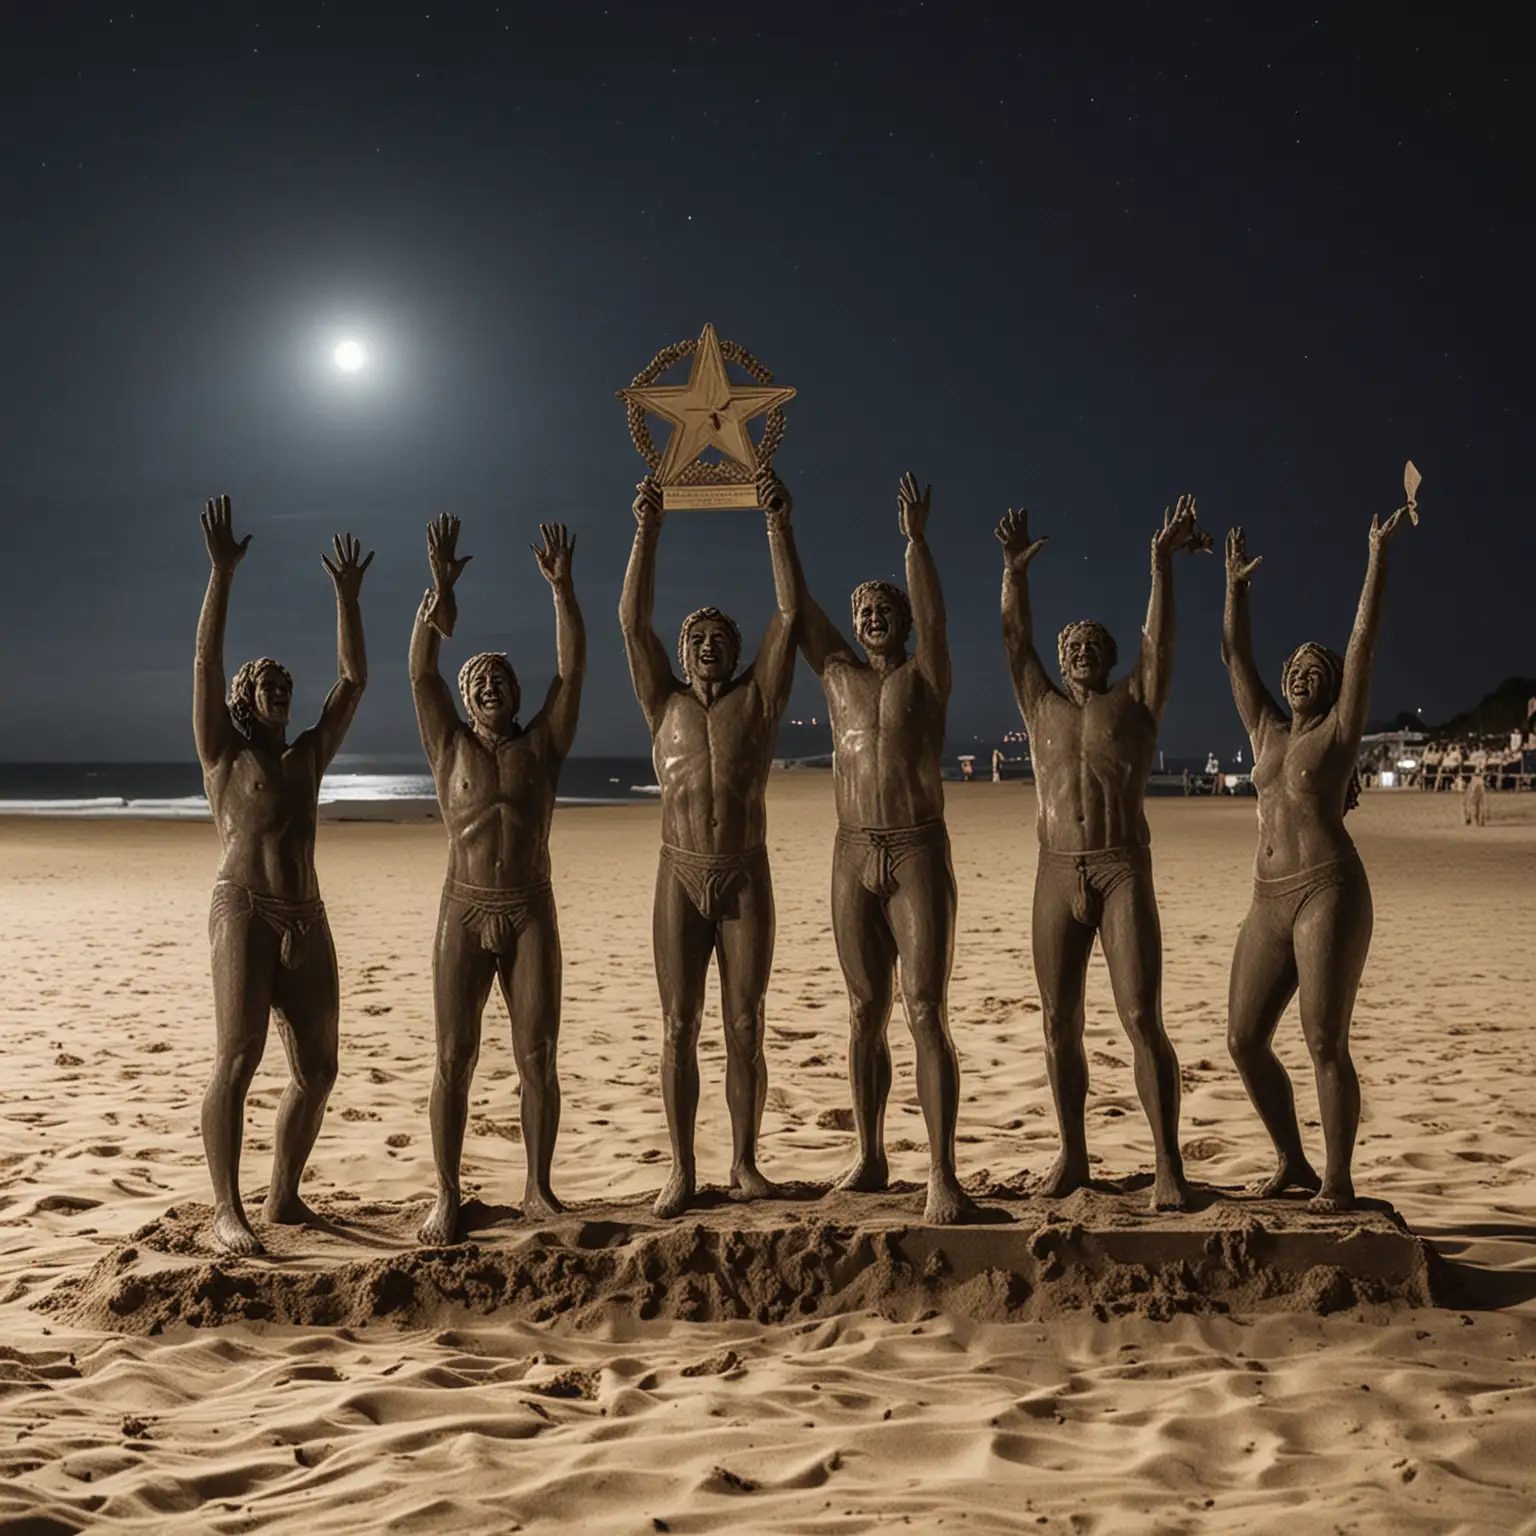 A picture of five people celebrating on the beach in the danish seaside town Tisvilde at night with an award statue standing in the sand